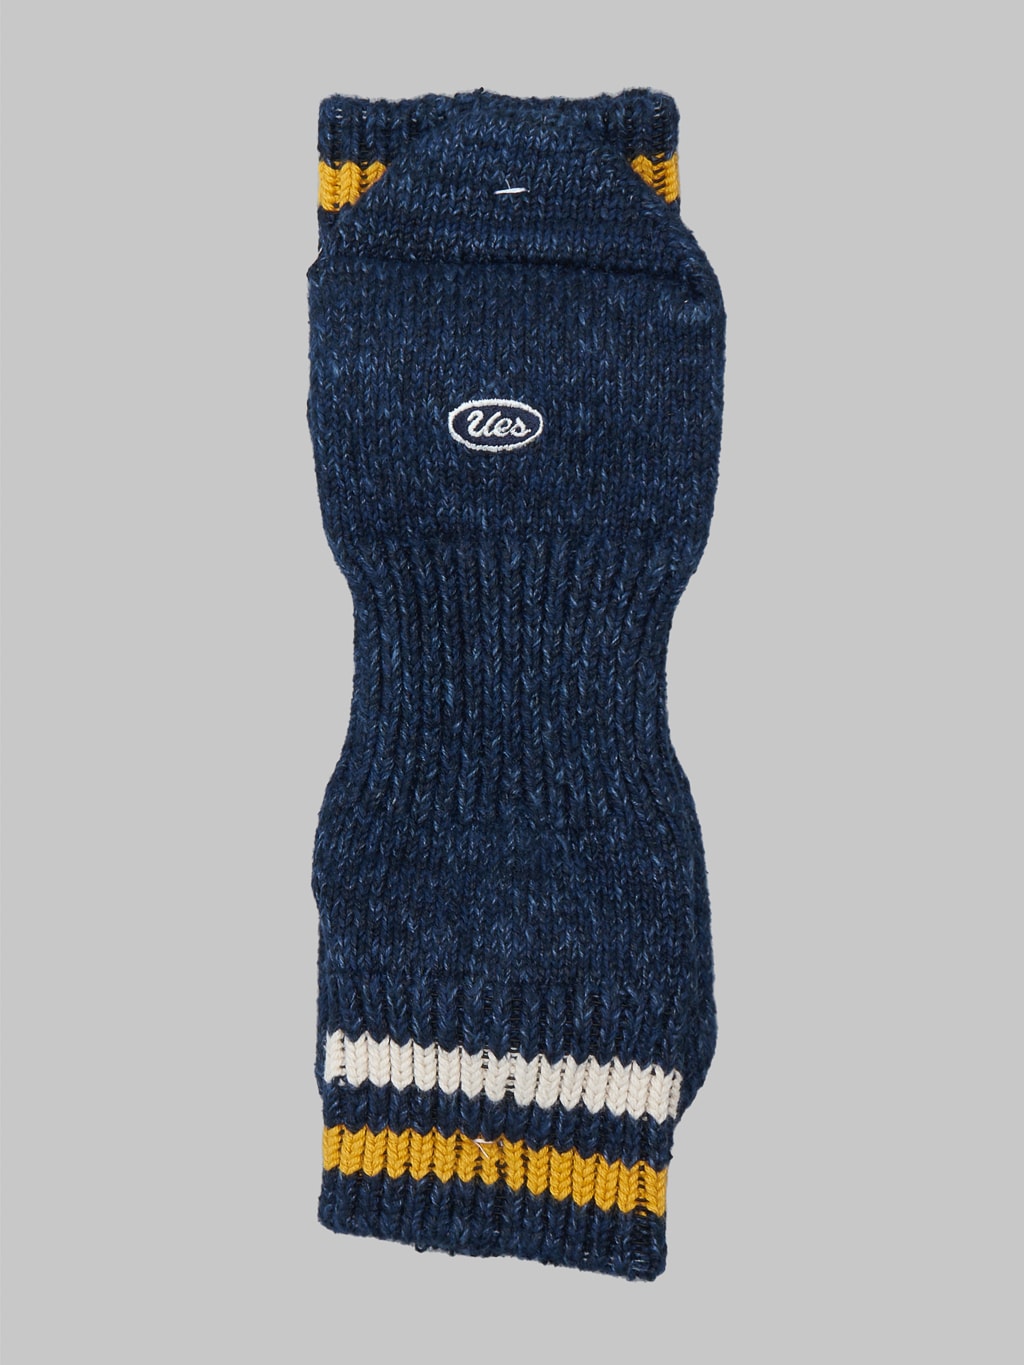 UES Sneakers Socks Navy and Yellow made in japan